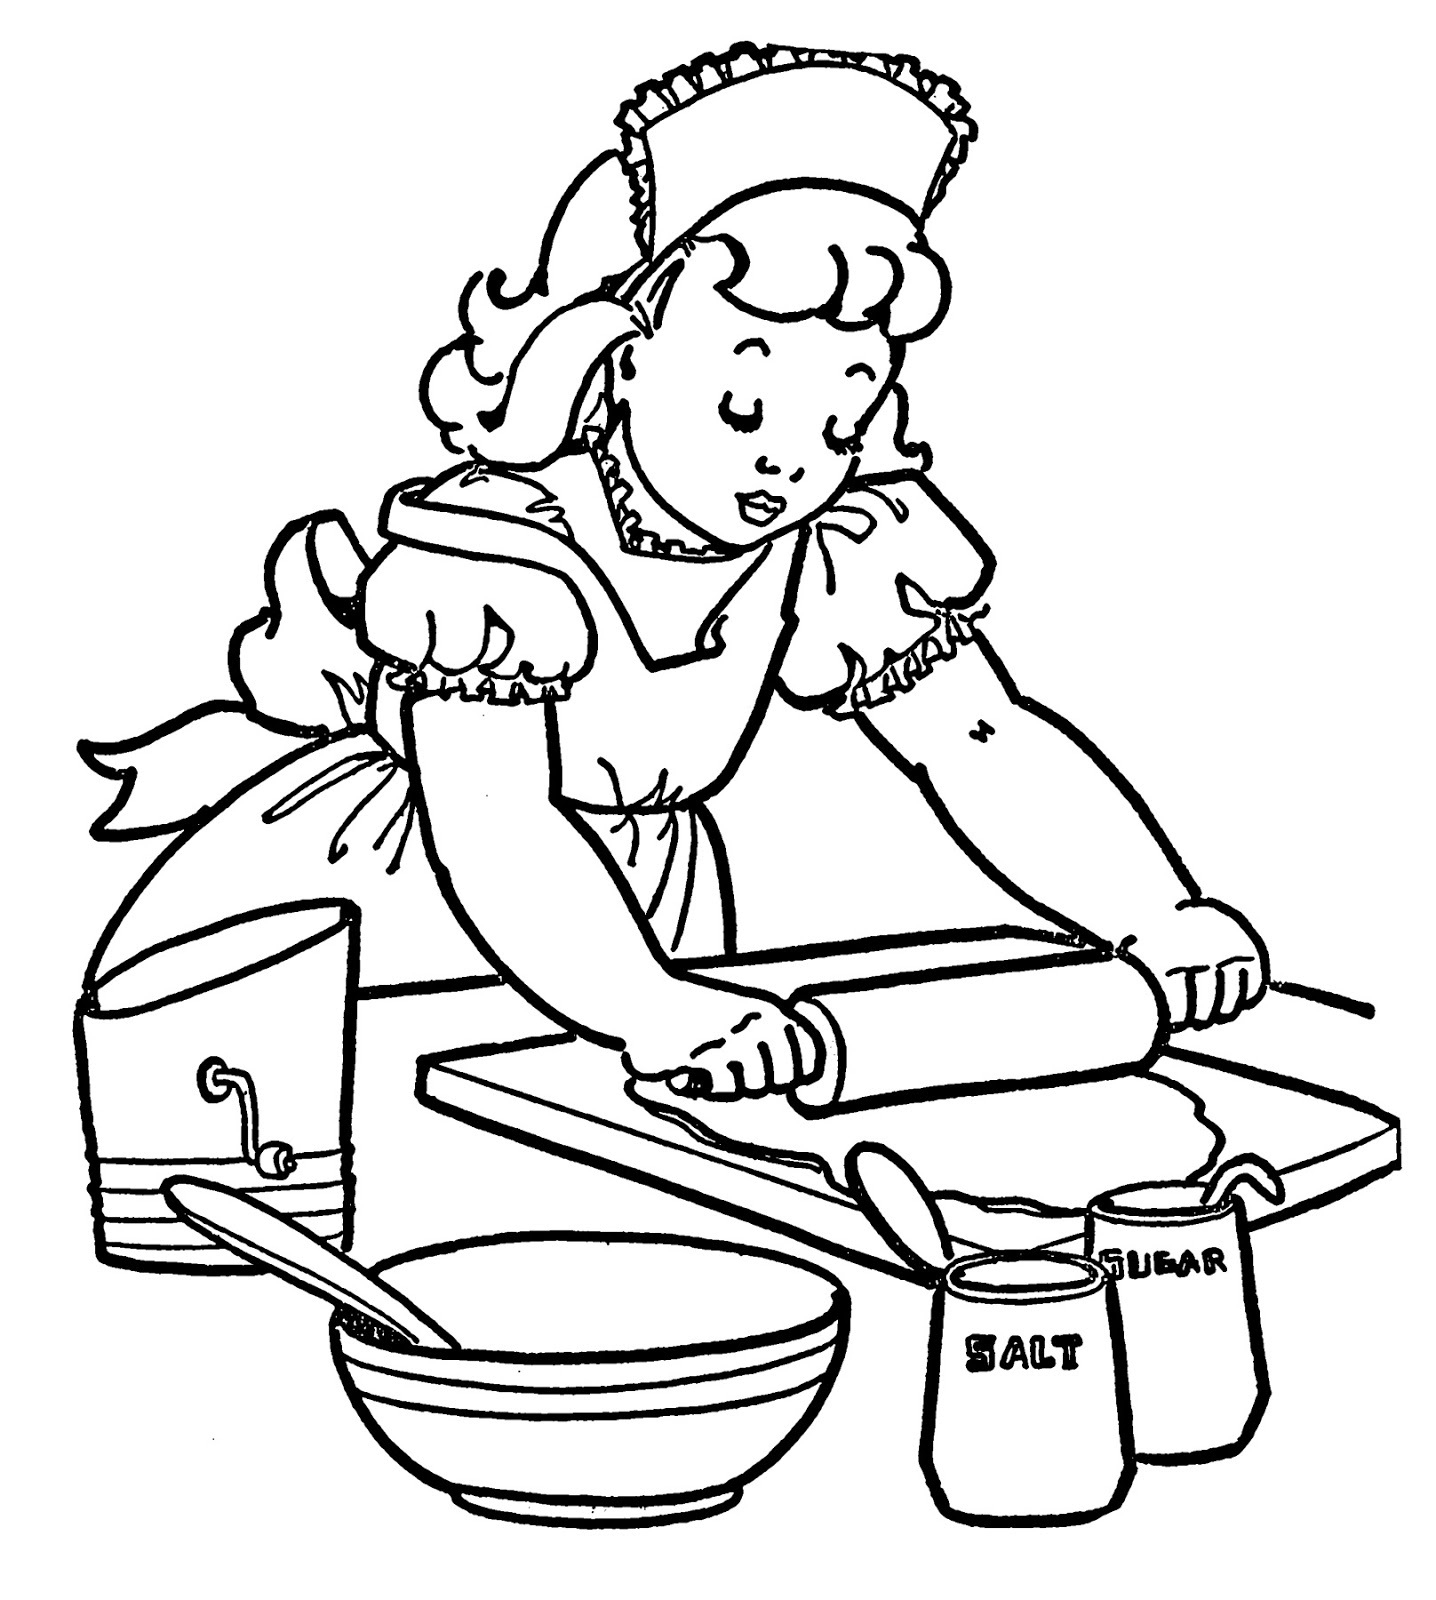 bakery clipart black and white